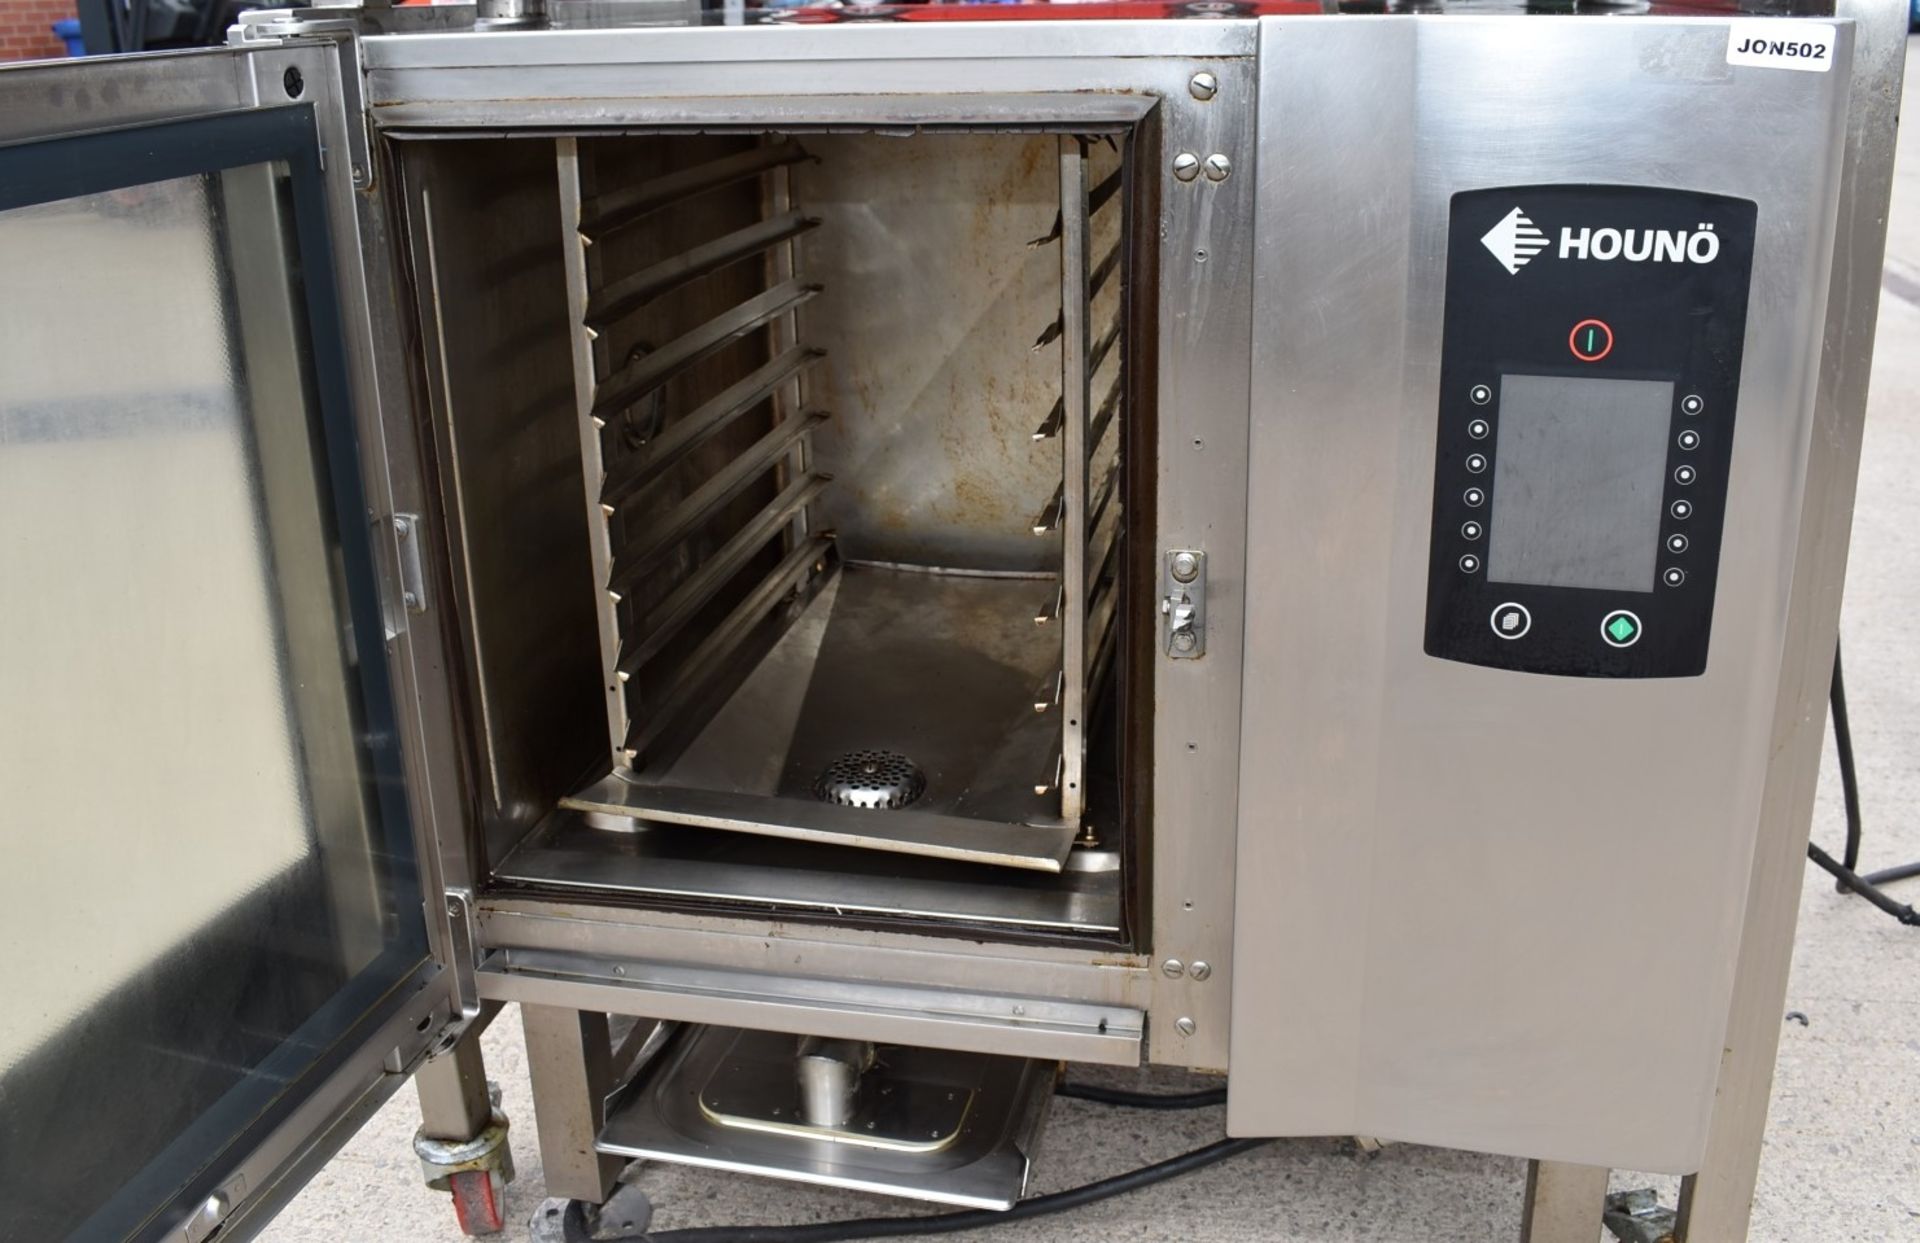 1 x Houno Electric Combi Oven and Fri-jado Rotisserie Oven Combo With Stand - 3 Phase - Image 2 of 22